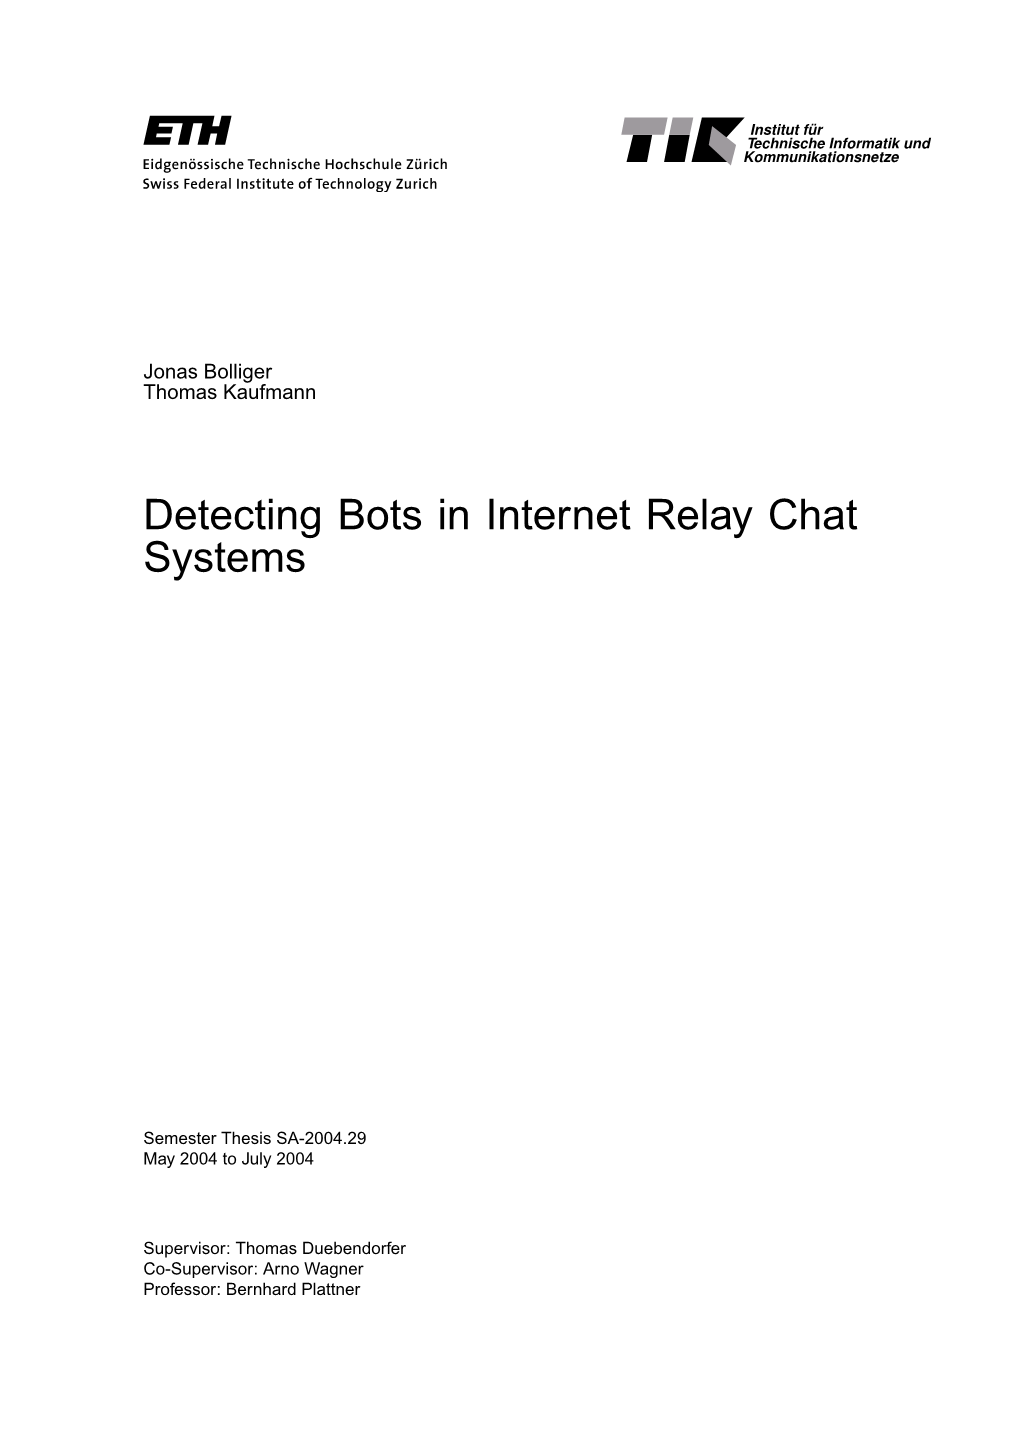 Detecting Bots in Internet Relay Chat Systems